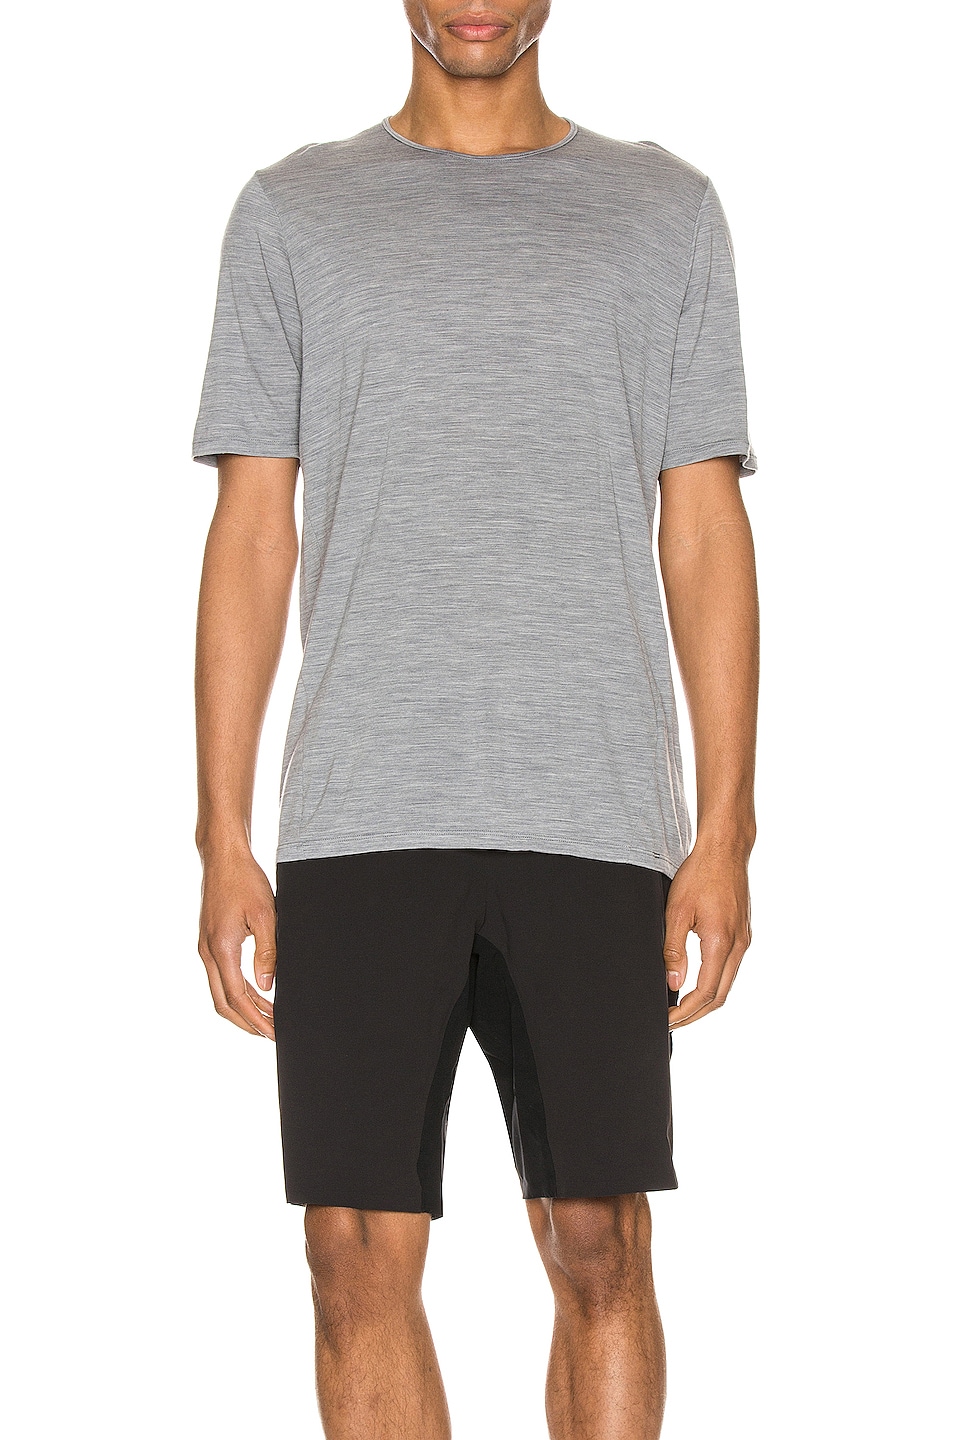 Image 1 of Veilance Frame Short Sleeve Tee in Ash Heather